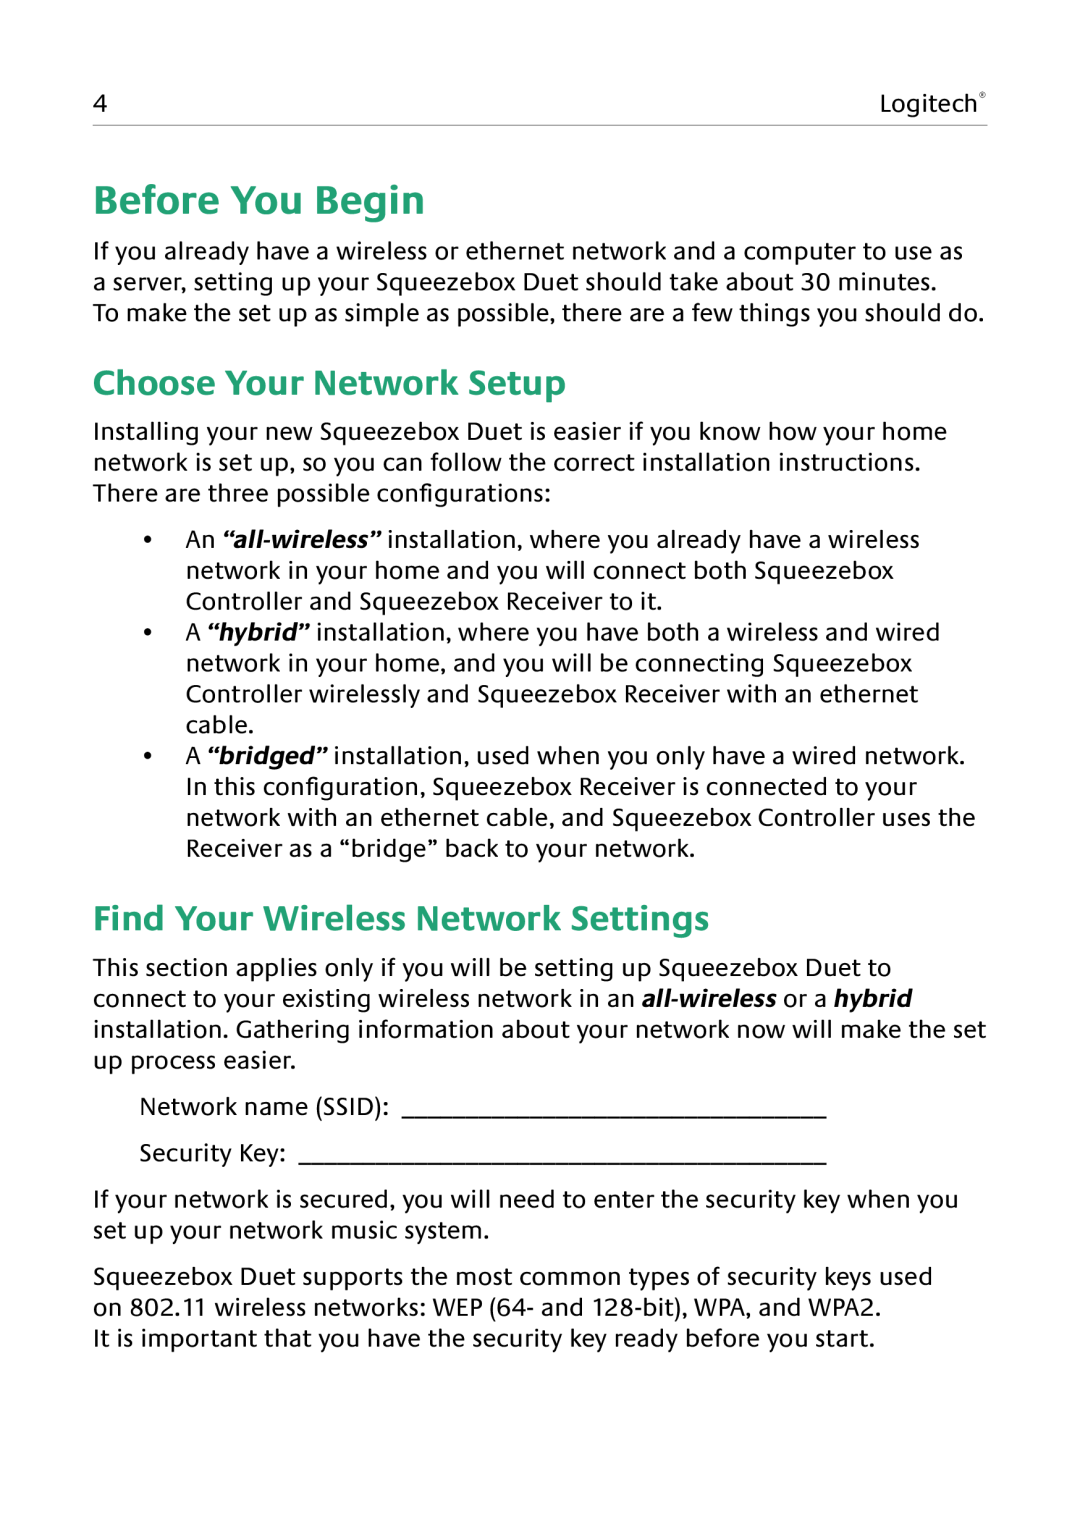 Logitech Duet manual Before You Begin, Choose Your Network Setup, Find Your Wireless Network Settings 